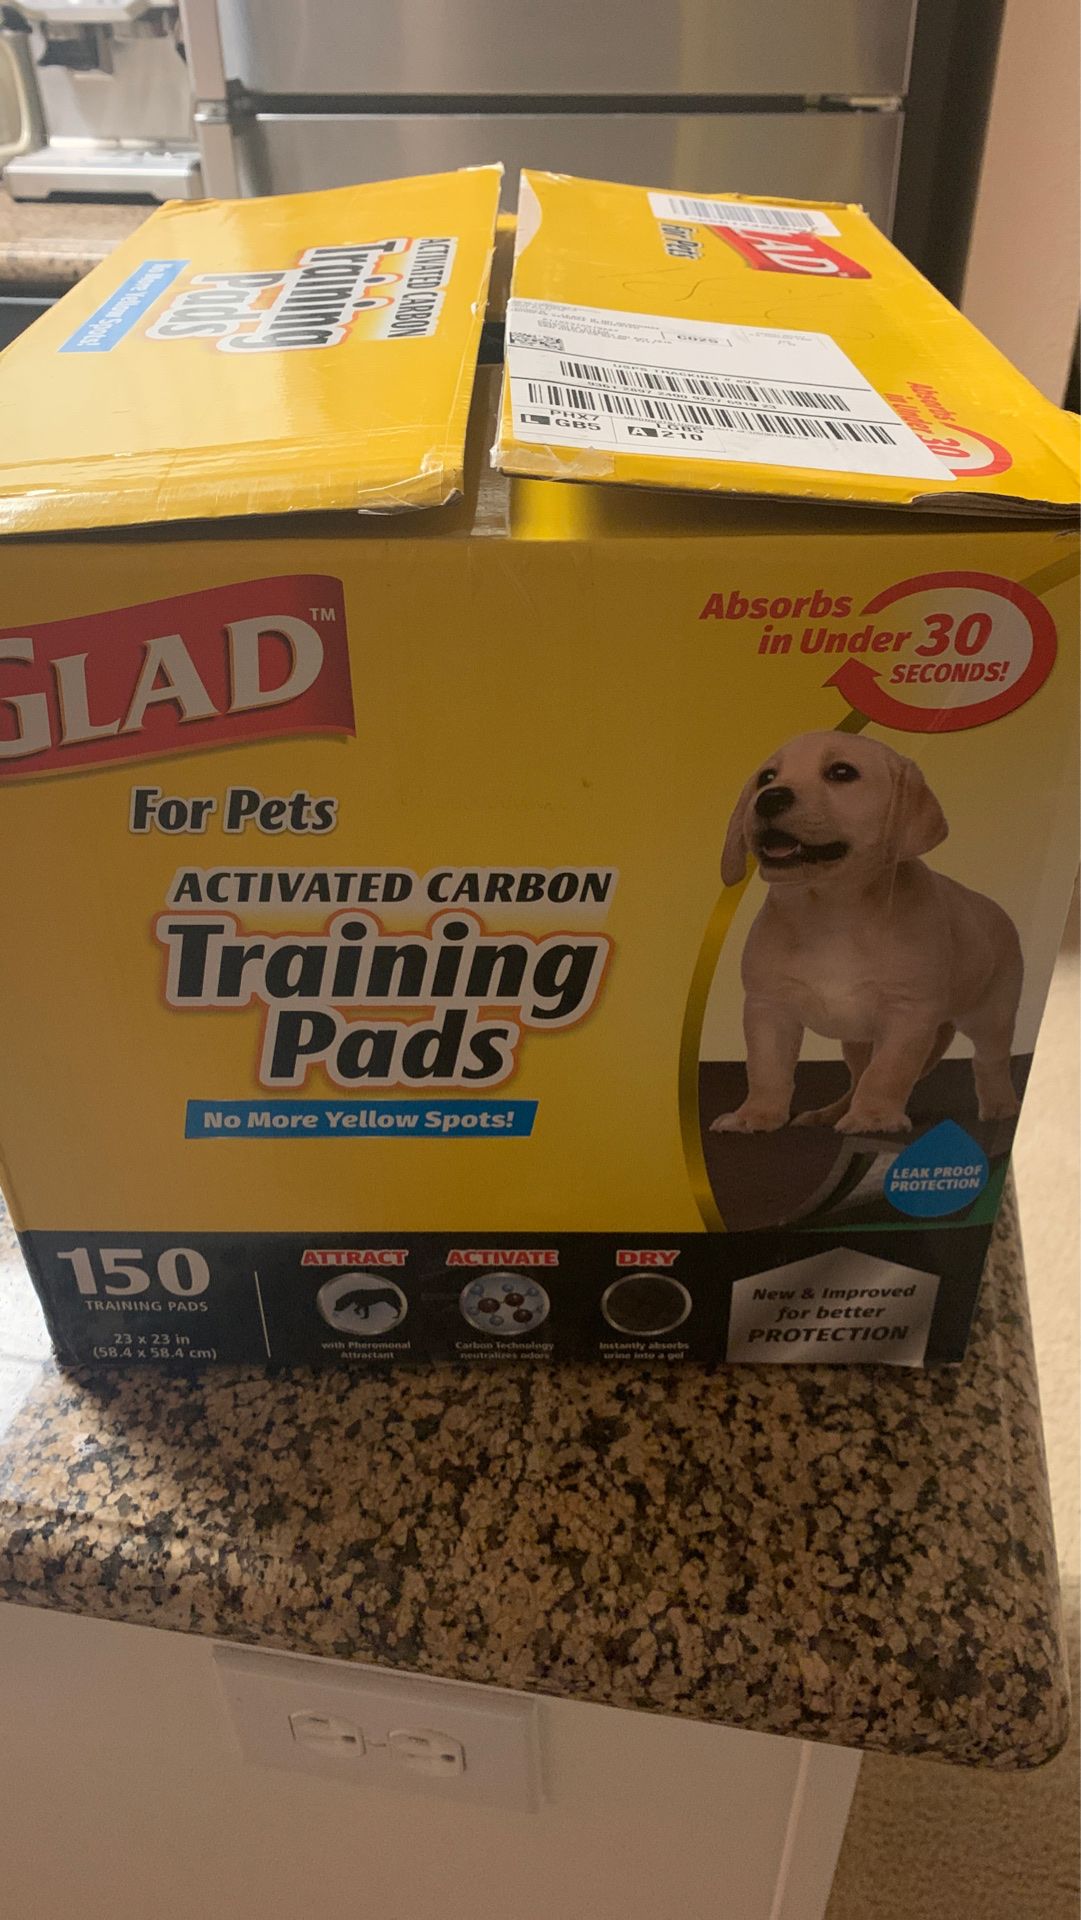 Training pads for dogs!